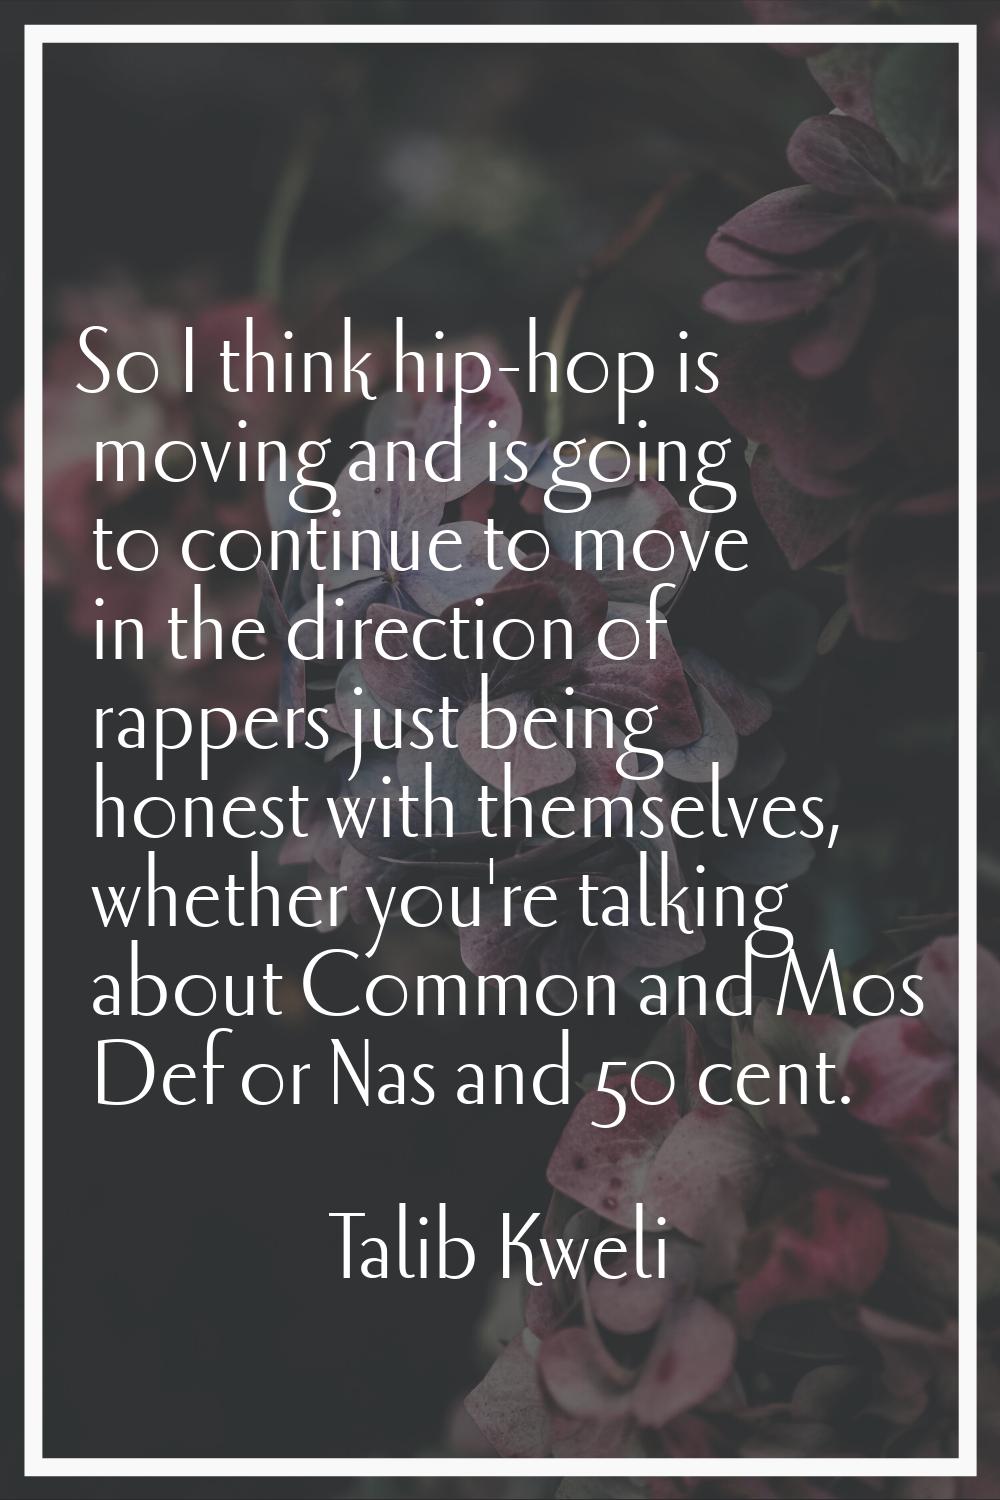 So I think hip-hop is moving and is going to continue to move in the direction of rappers just bein